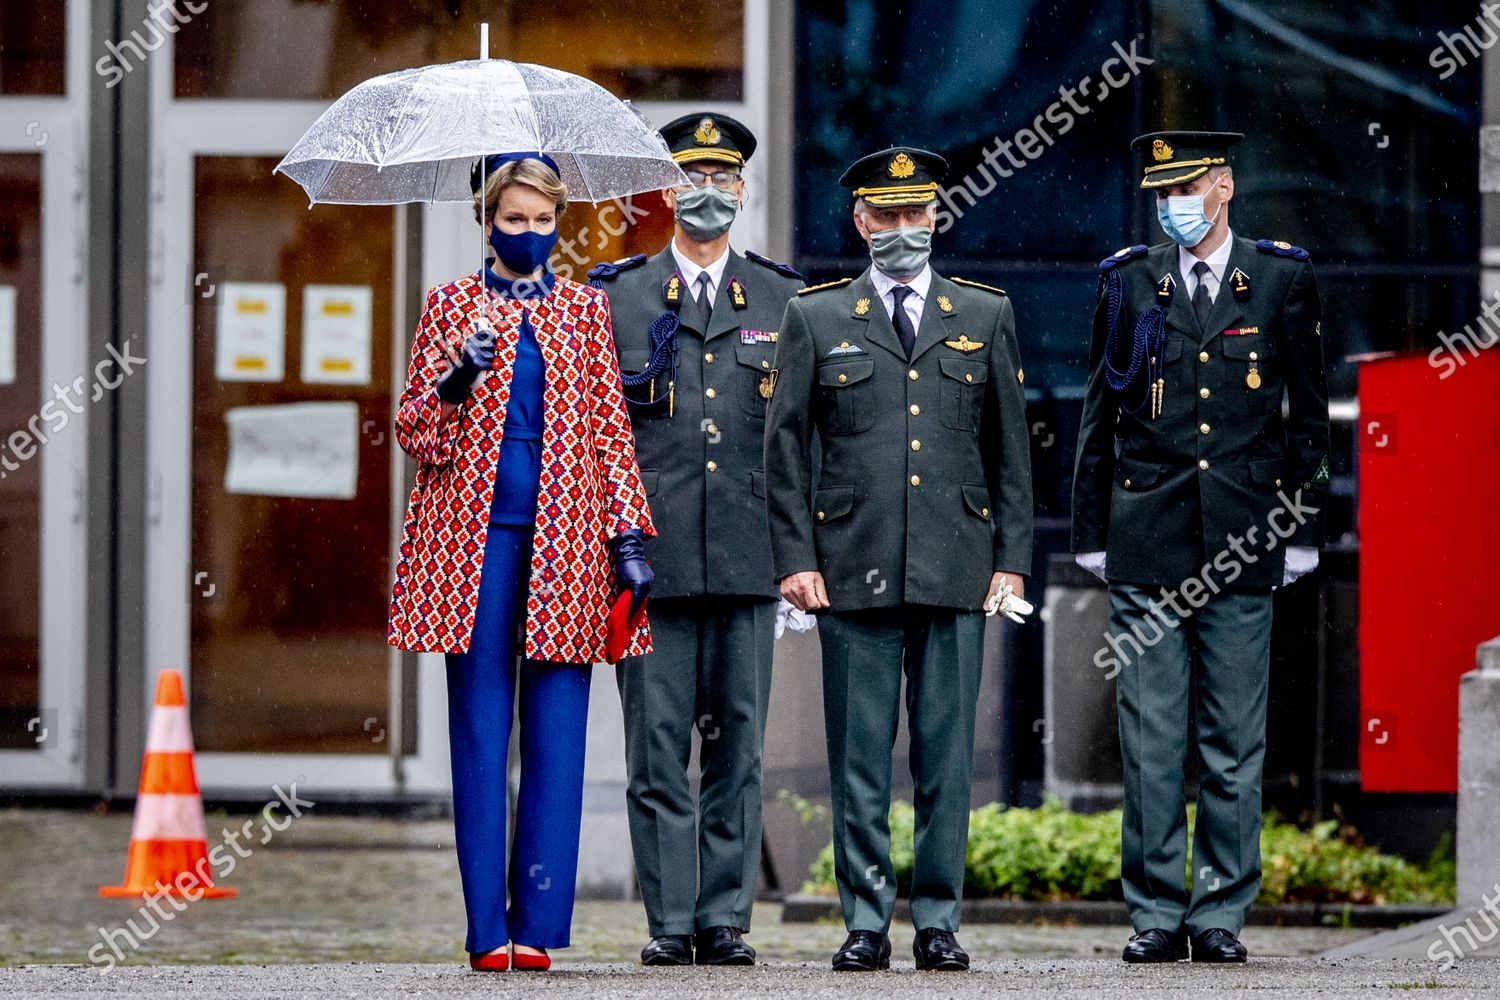 CASA REAL BELGA - Página 27 Belgian-royals-attend-ceremony-for-the-presentation-of-the-blue-berets-royal-military-academy-erm-brussels-belgium-shutterstock-editorial-10790505h